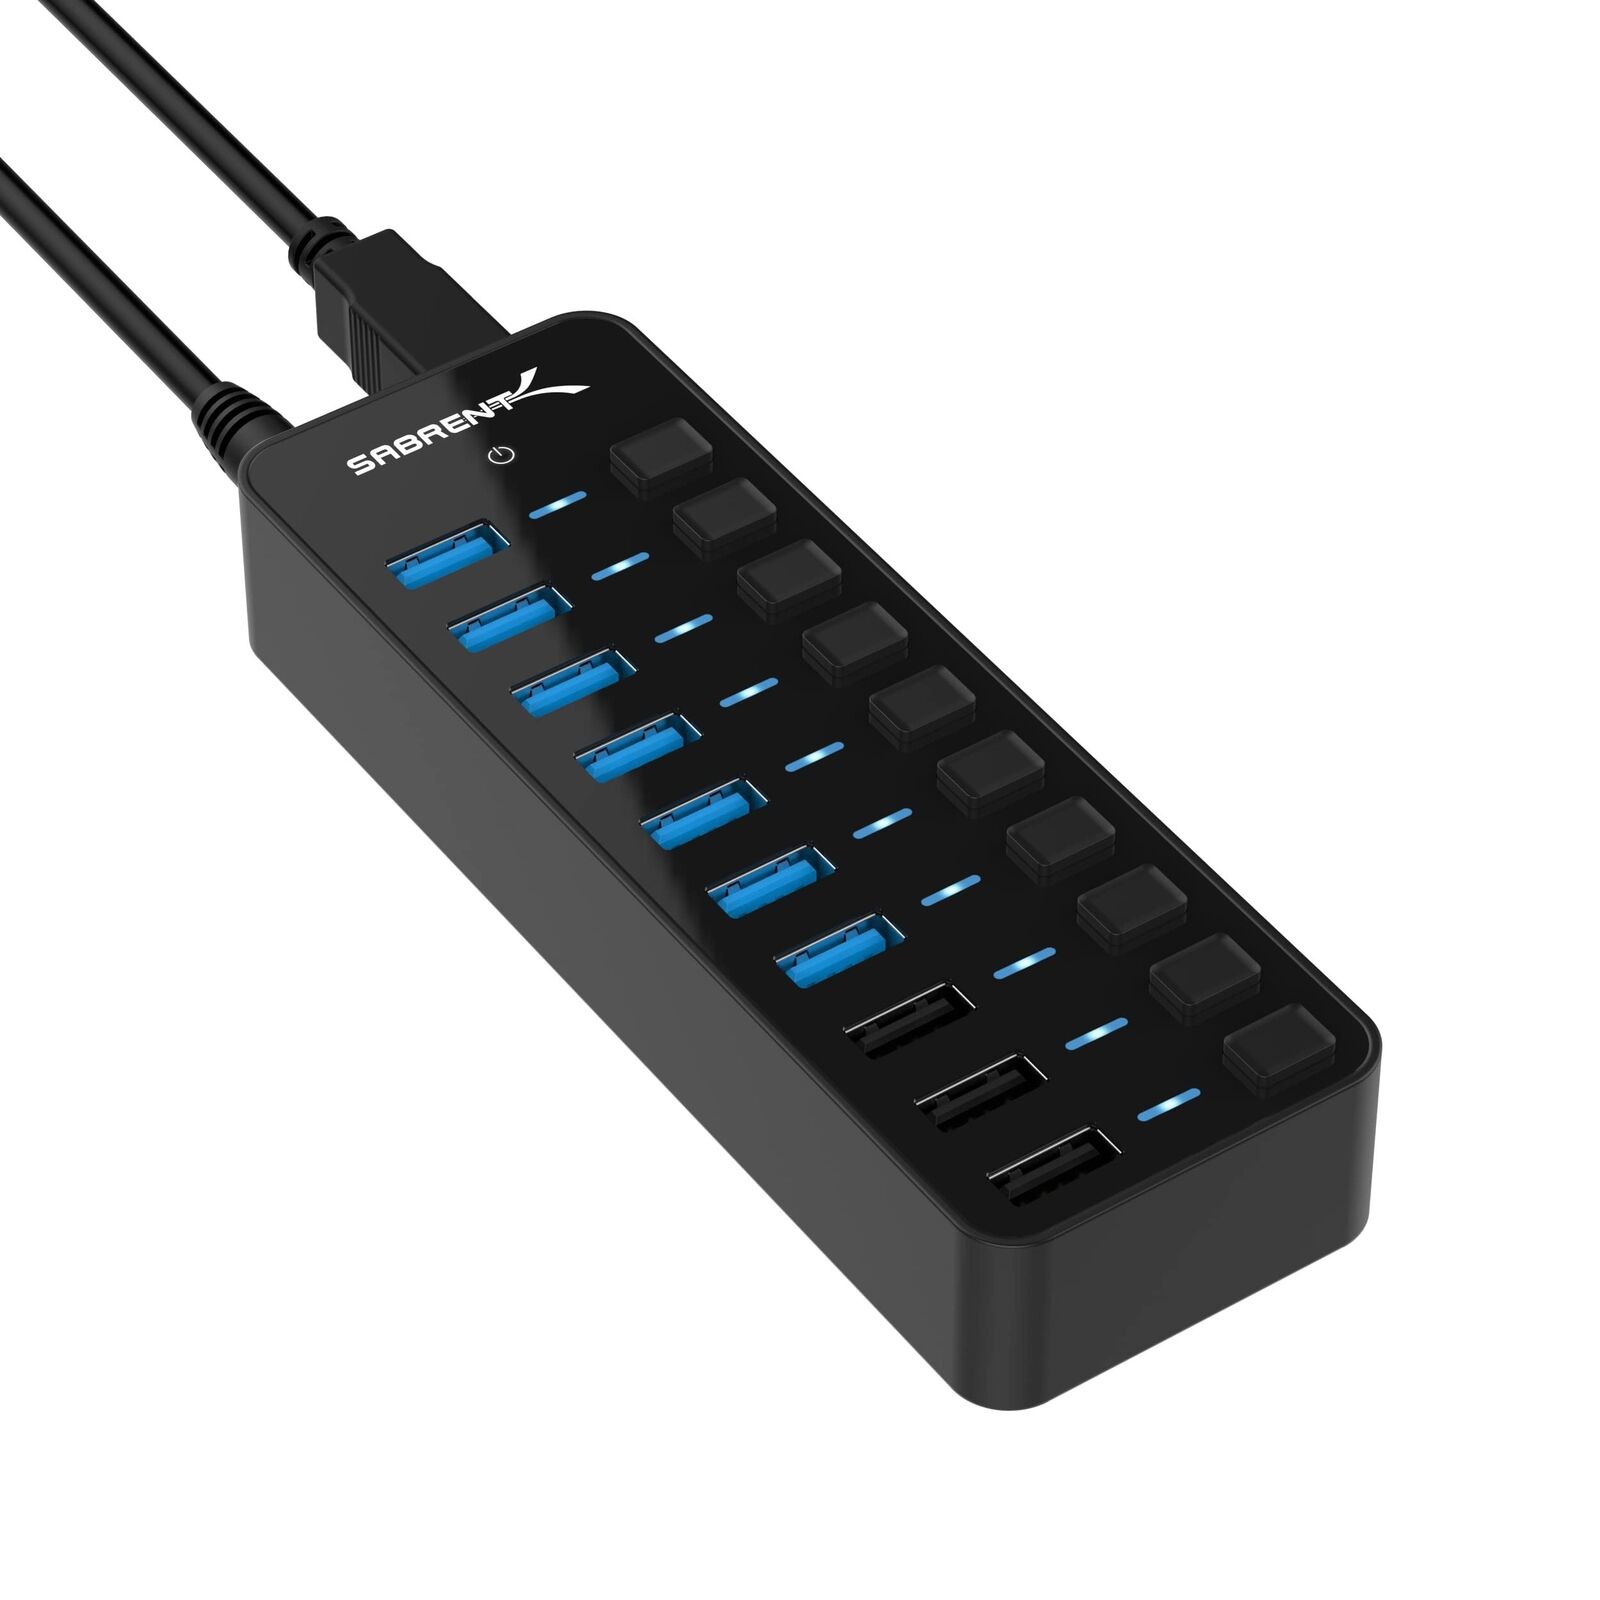 SABRENT 60W 10 Port USB 3.0 Hub Includes 3 Smart Charging Ports with Individu...